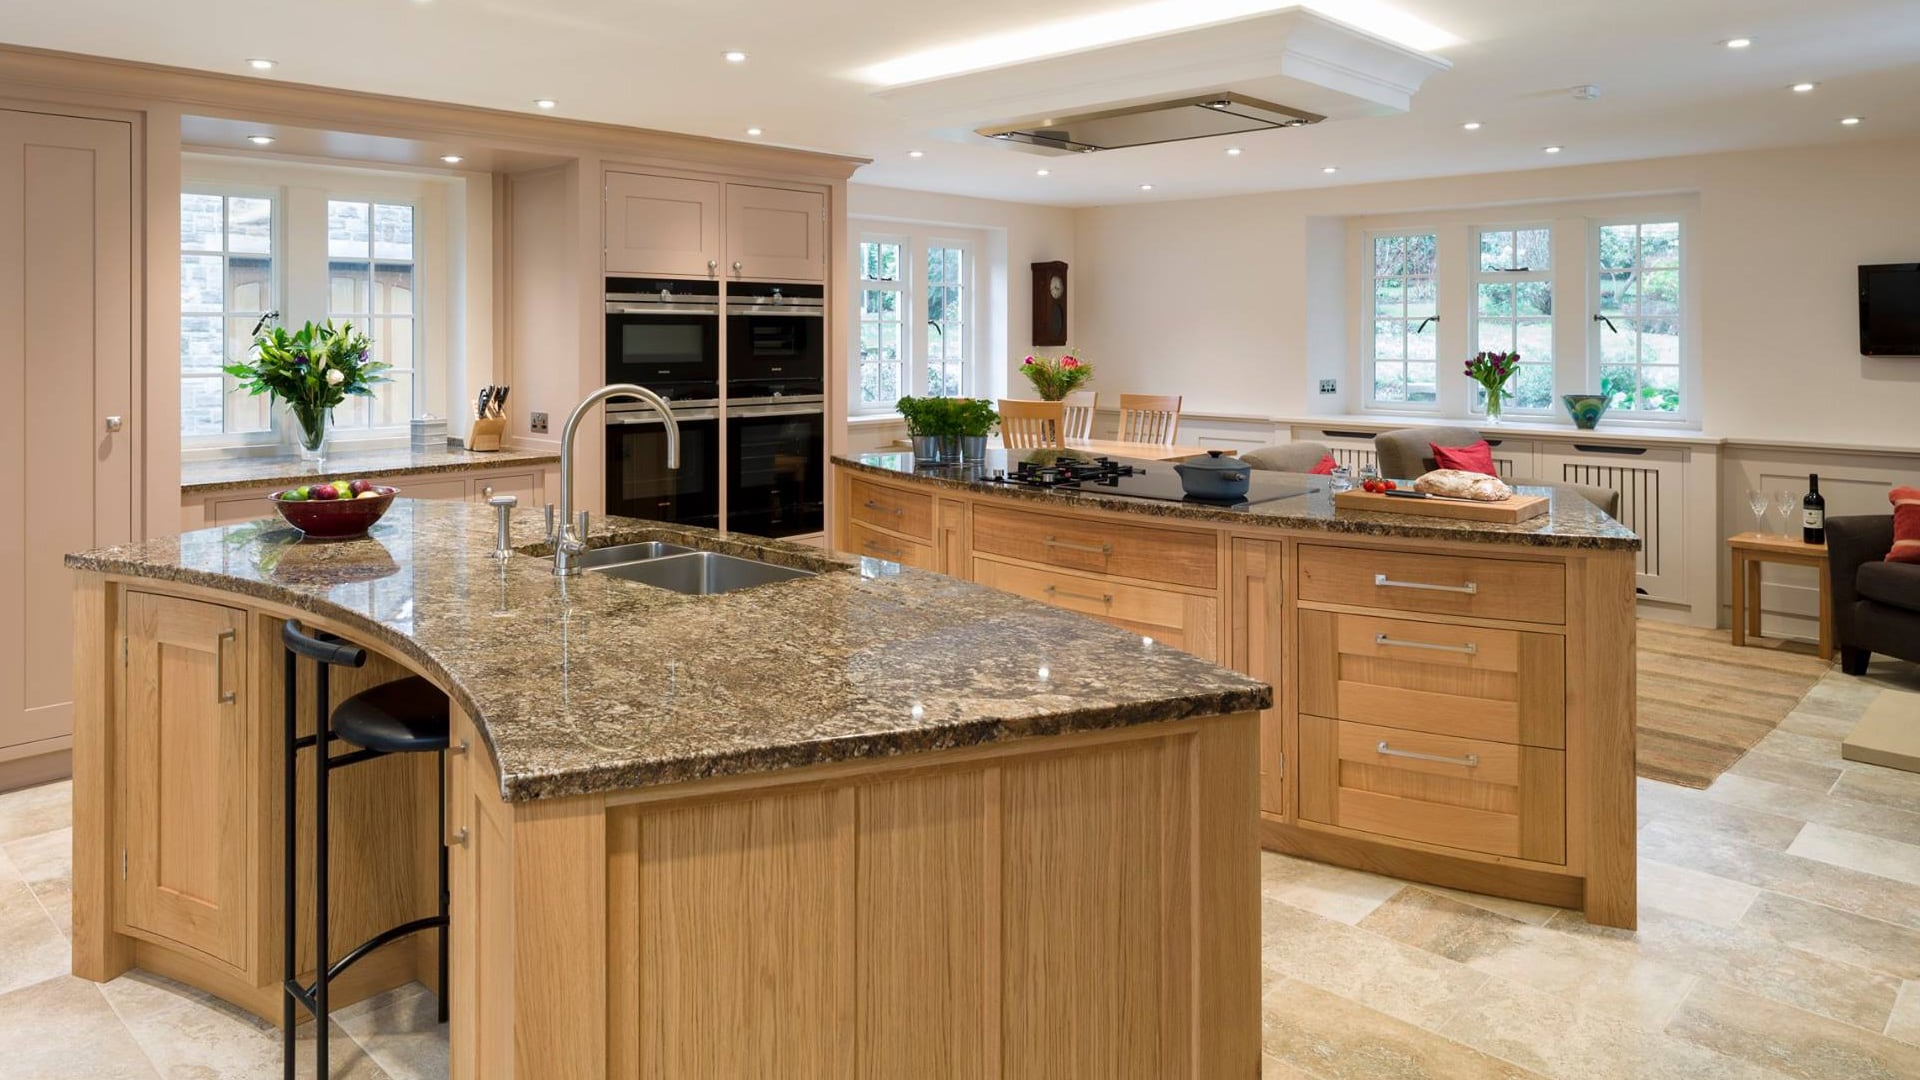 How we handcraft beautiful, sturdy and timeless kitchen cabinetry